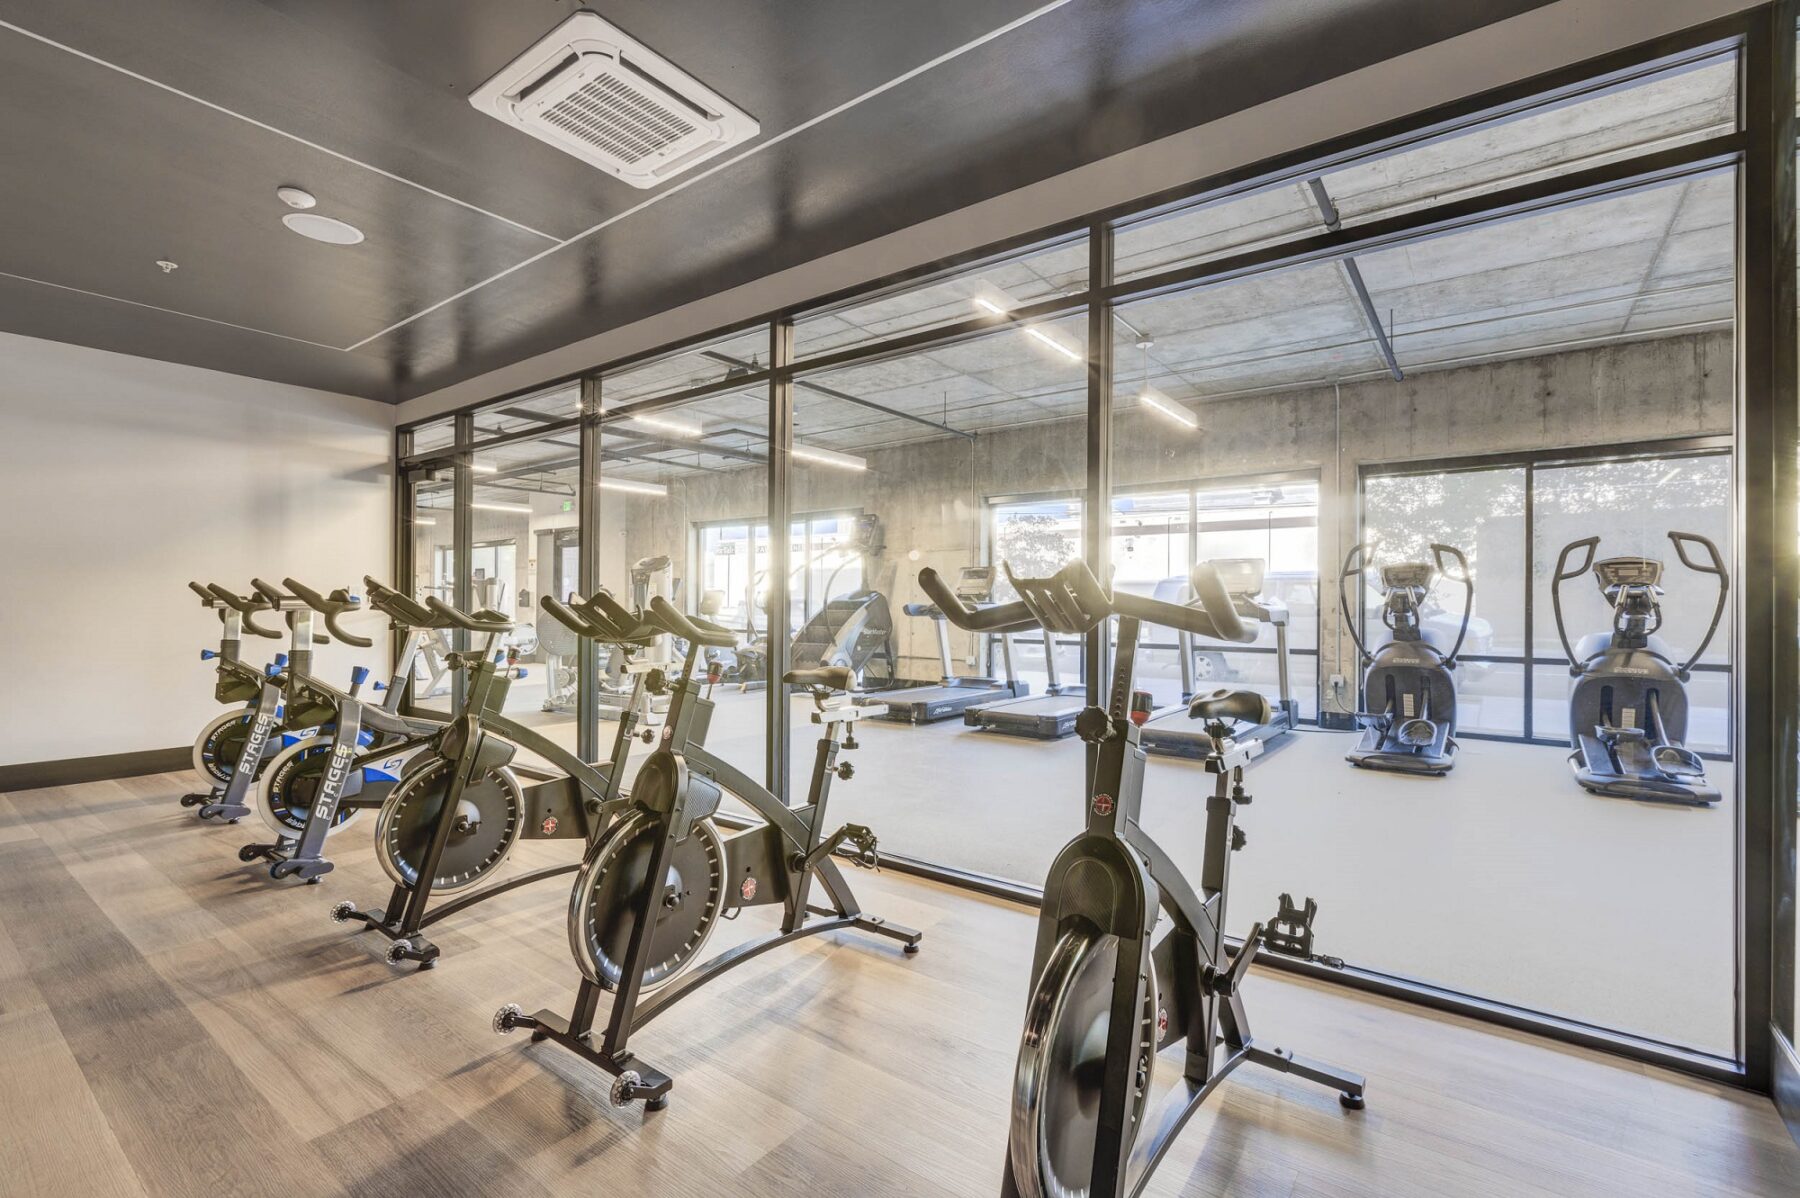 indoor gym stationary bikes, a glass wall that separates those from the stair masters